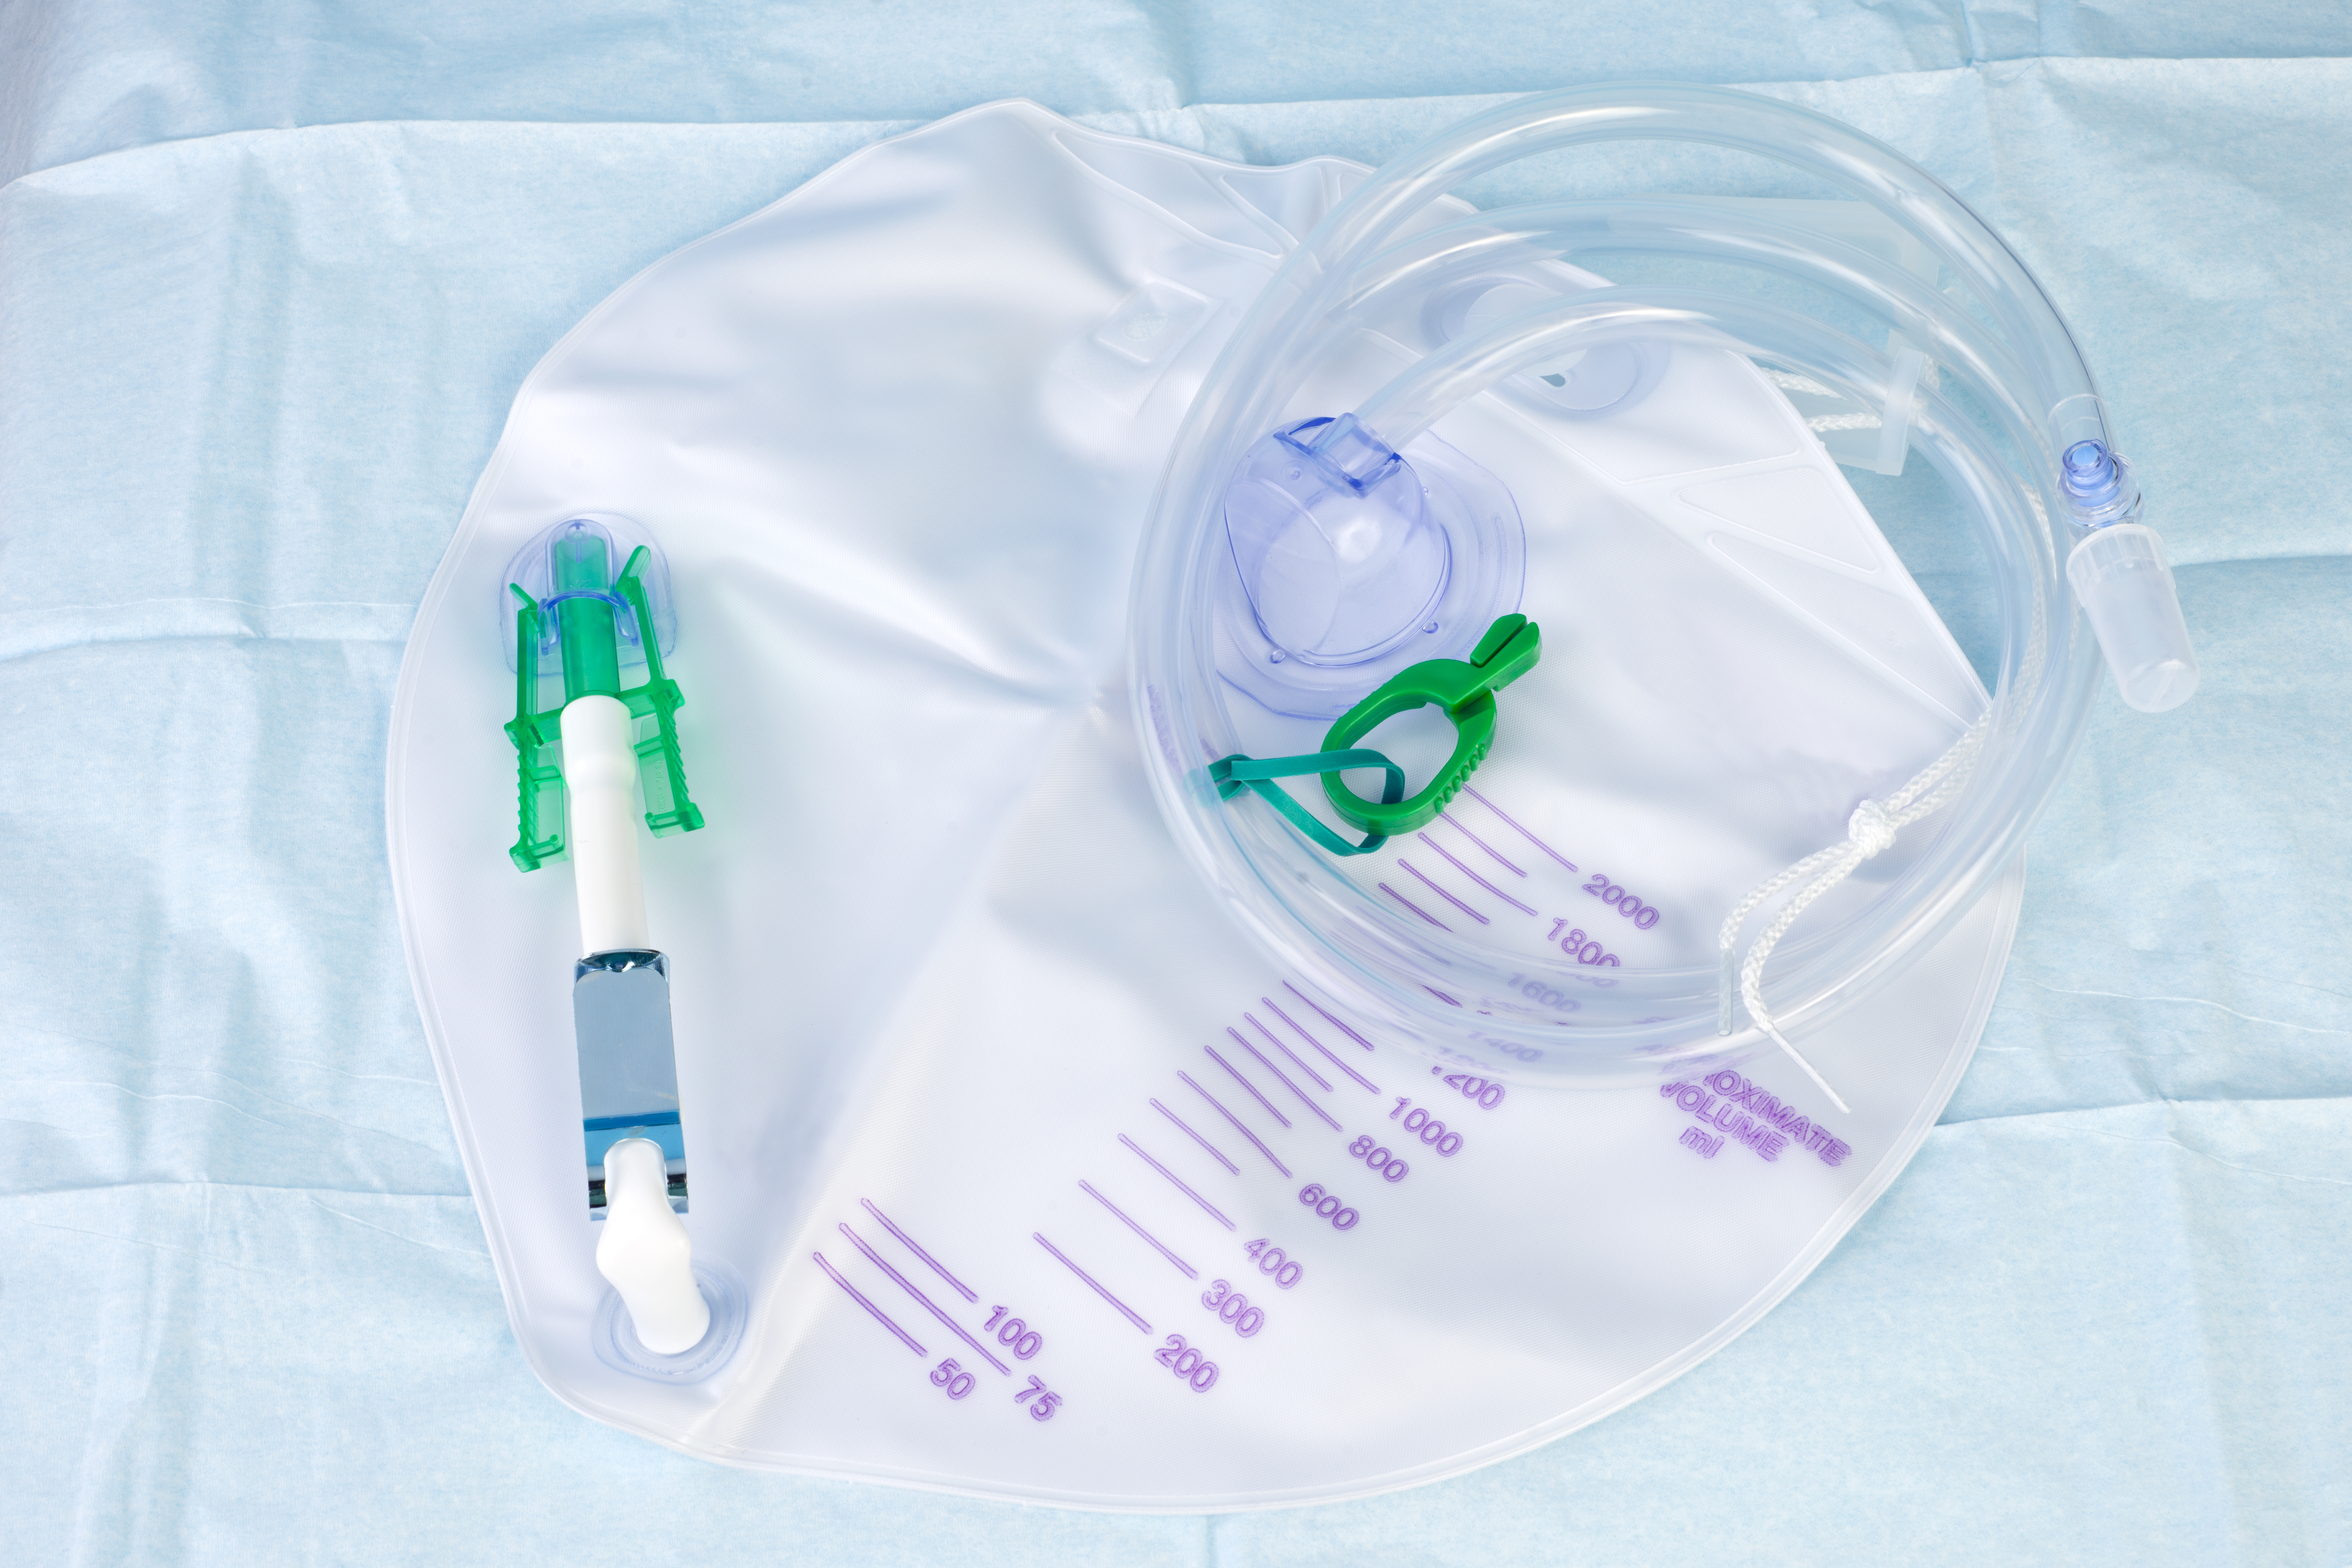 How to Care for Your Urinary Catheter